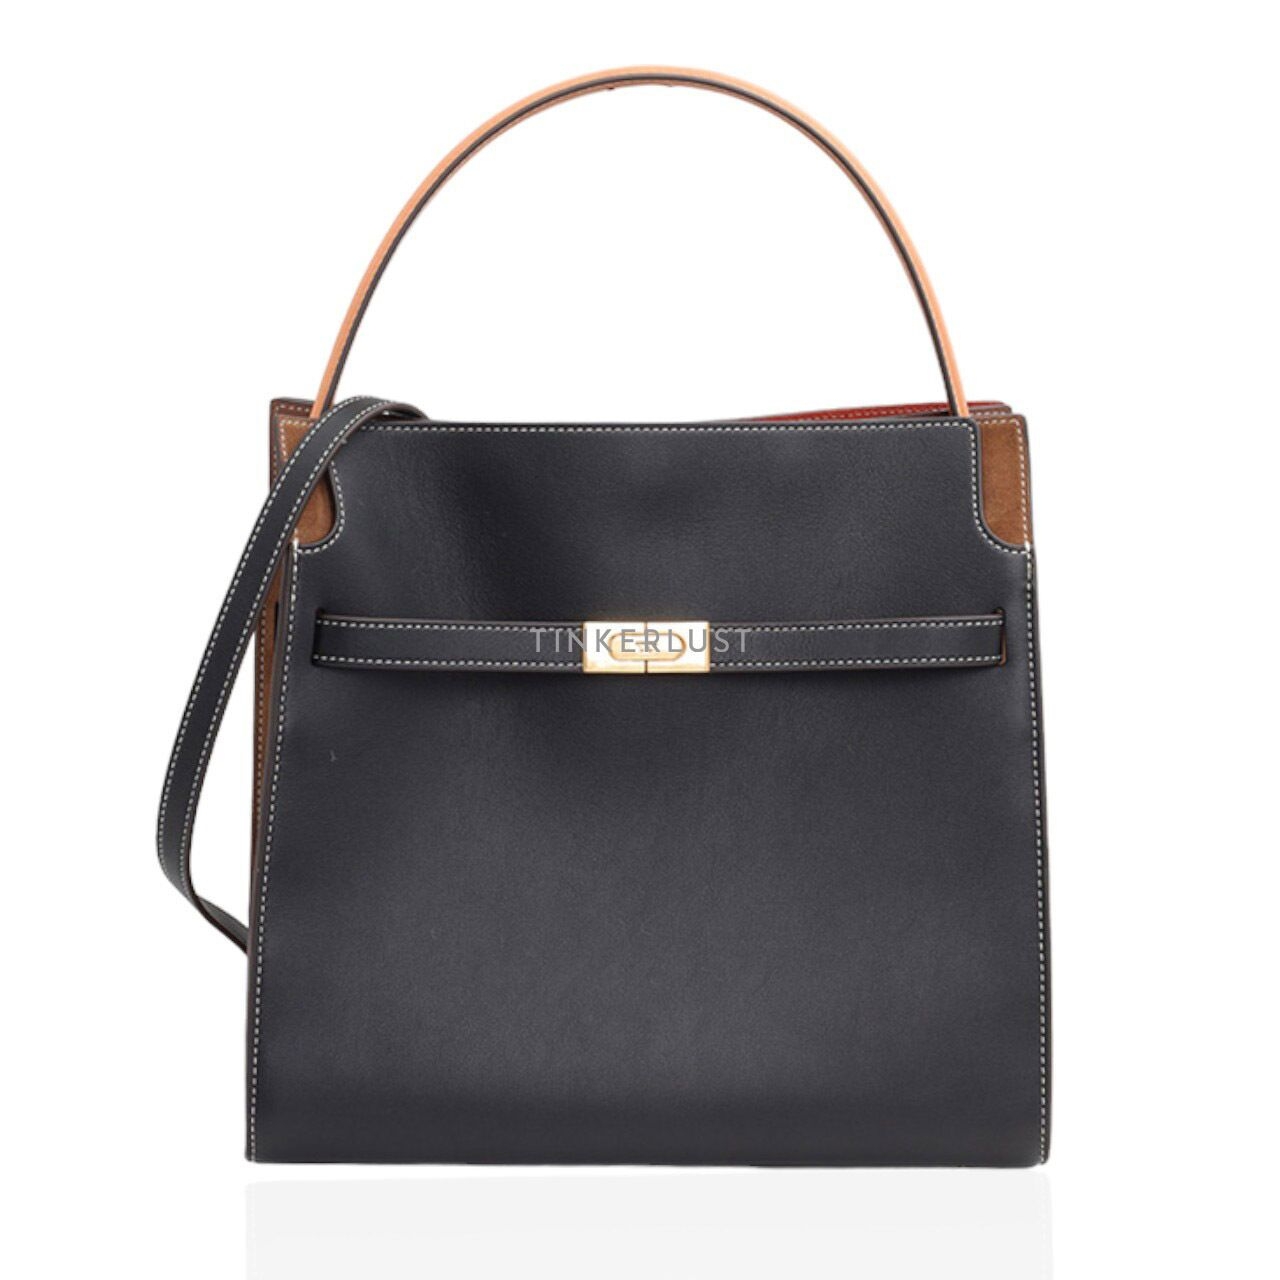 Tory Burch Lee Radziwill Double Bag in Black/Brown Satchel